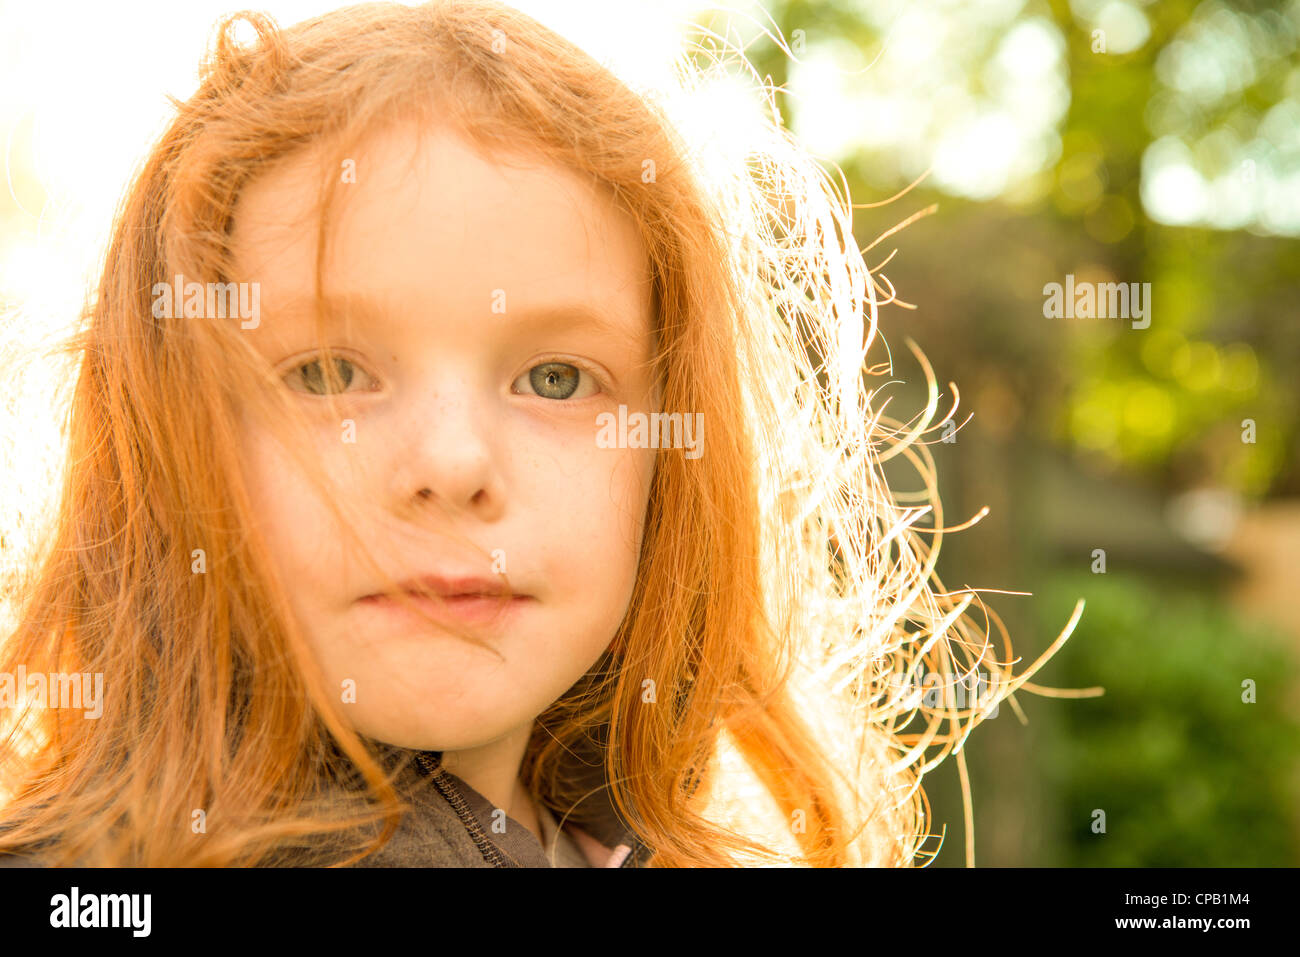 Little girl with ginger hair looking to camera in her summer garden Stock Photo